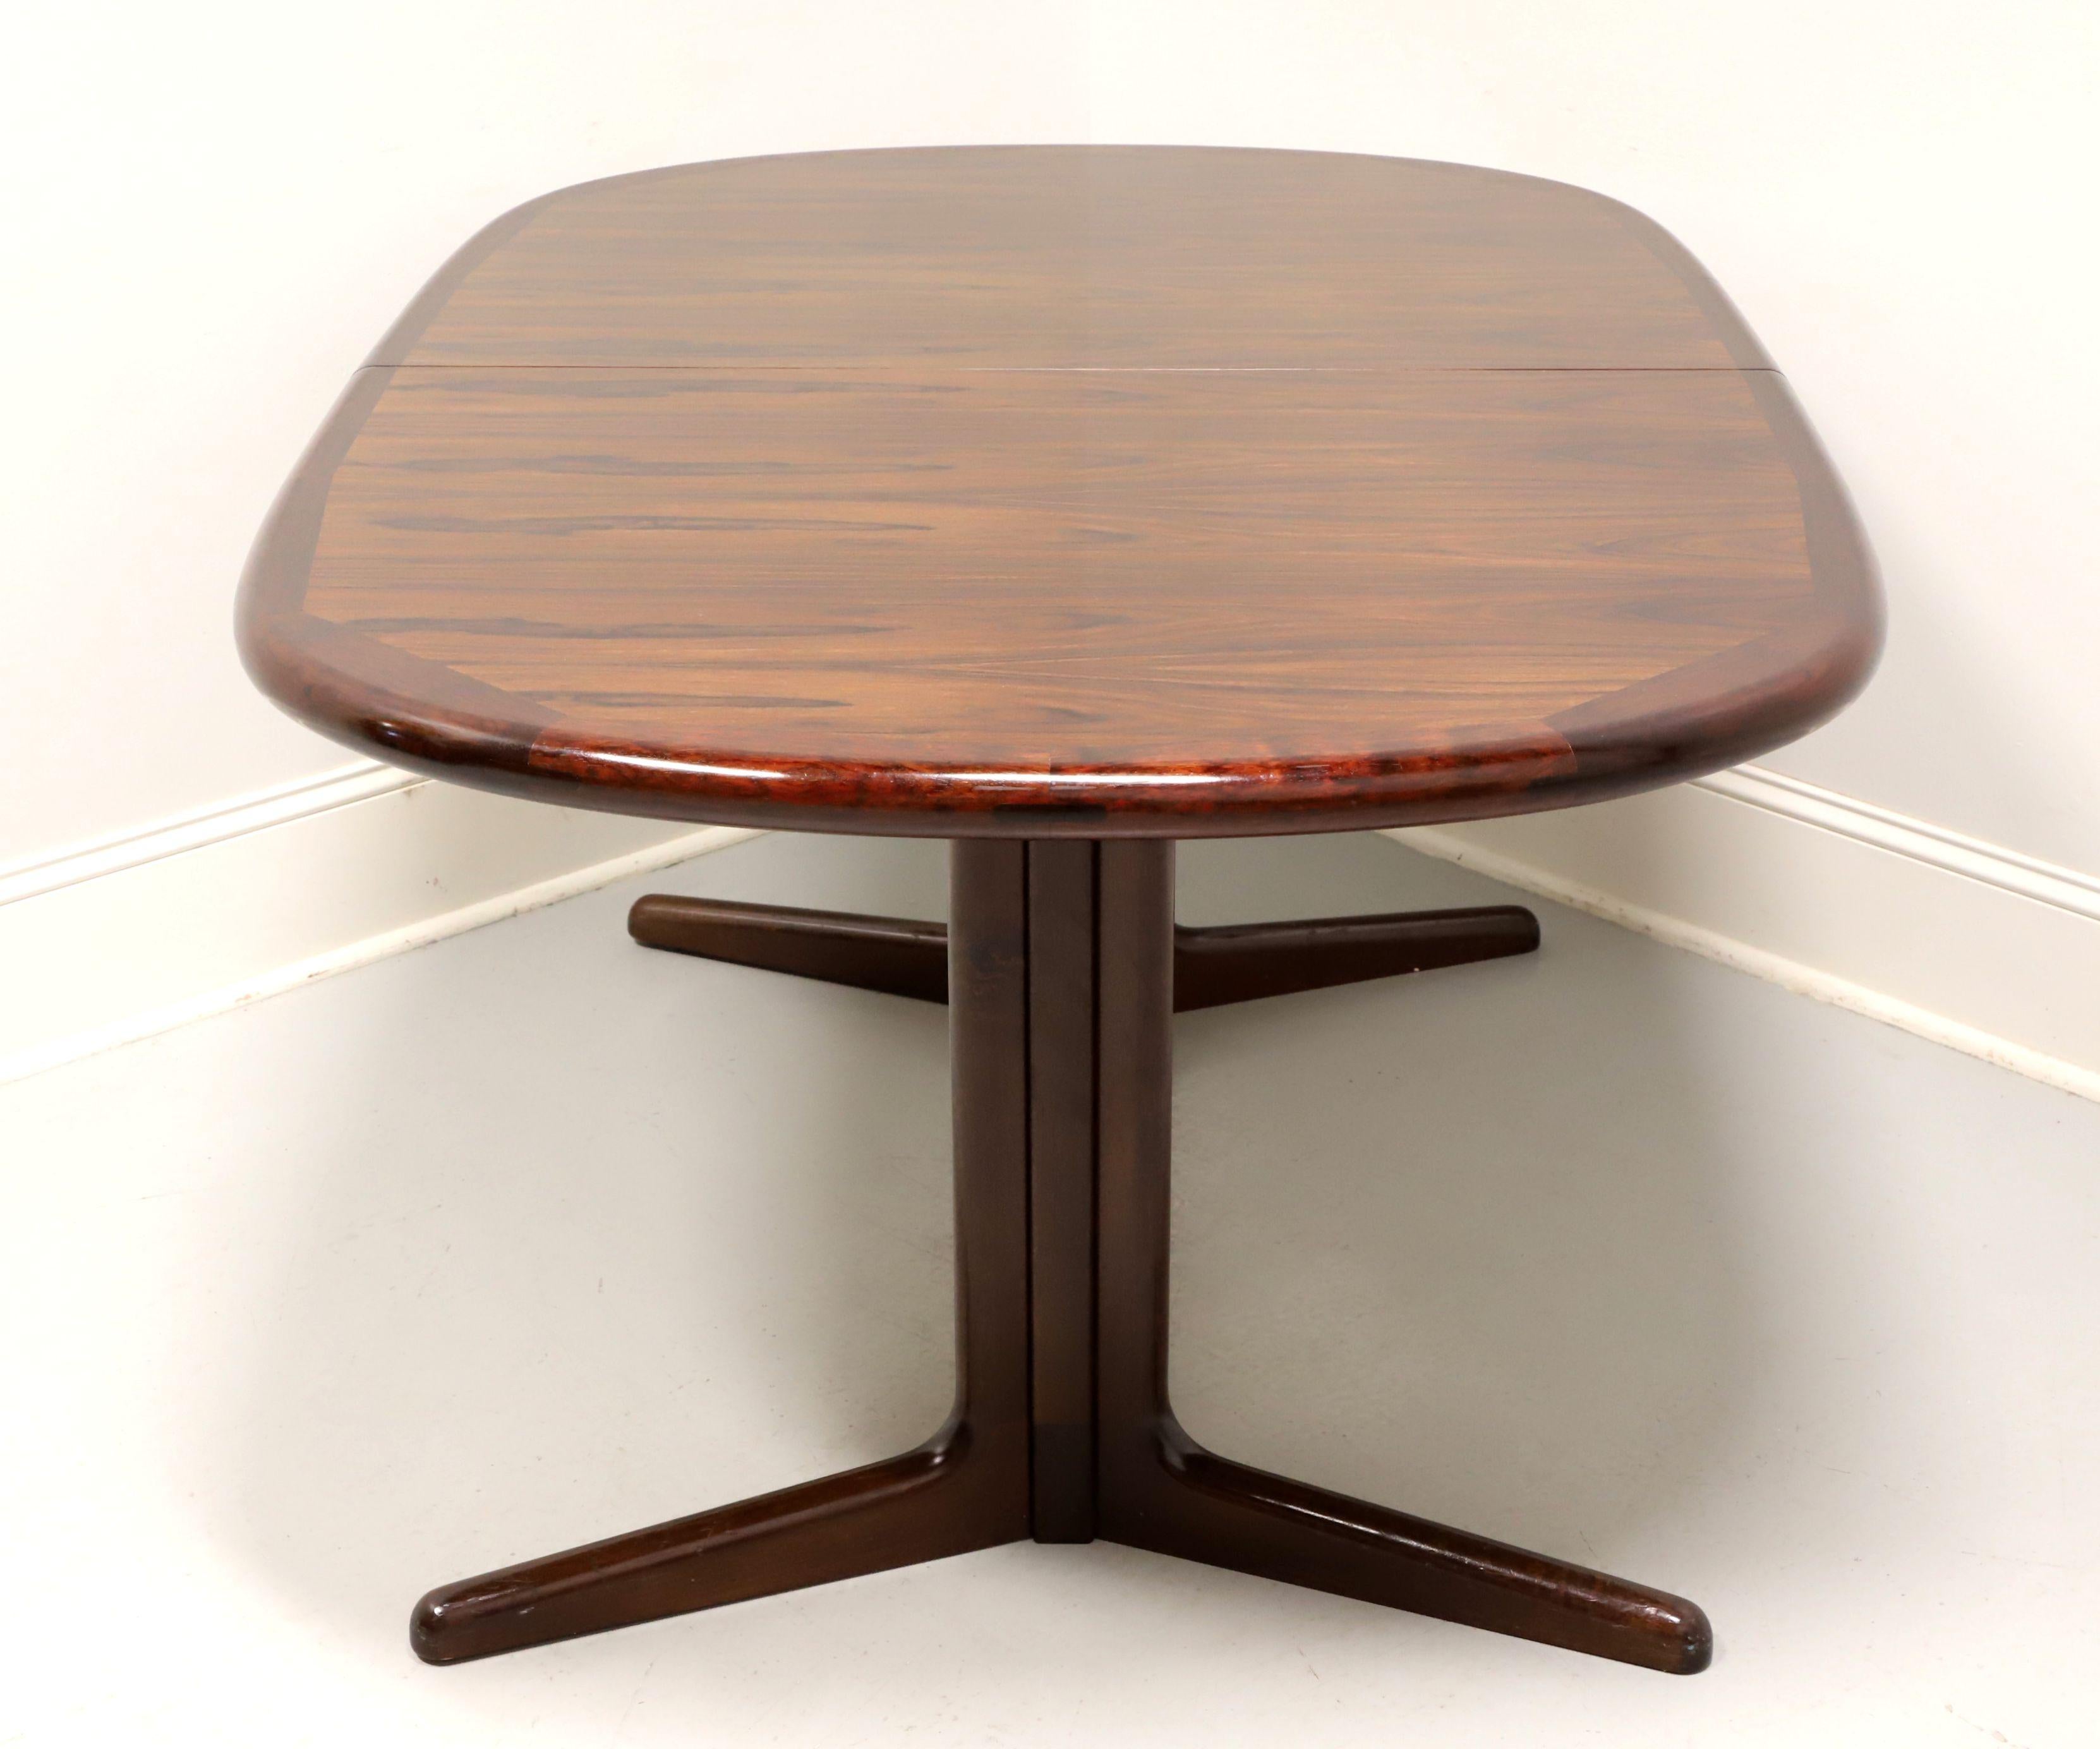 A tapered rectangular shaped dining table in the Danish Modern style by Edvard Valentinsen. Rosewood with a stunning grain to the top, smooth rounded apron and trestle style base. Includes two 19 inch extension leaves for placement on wood expansion